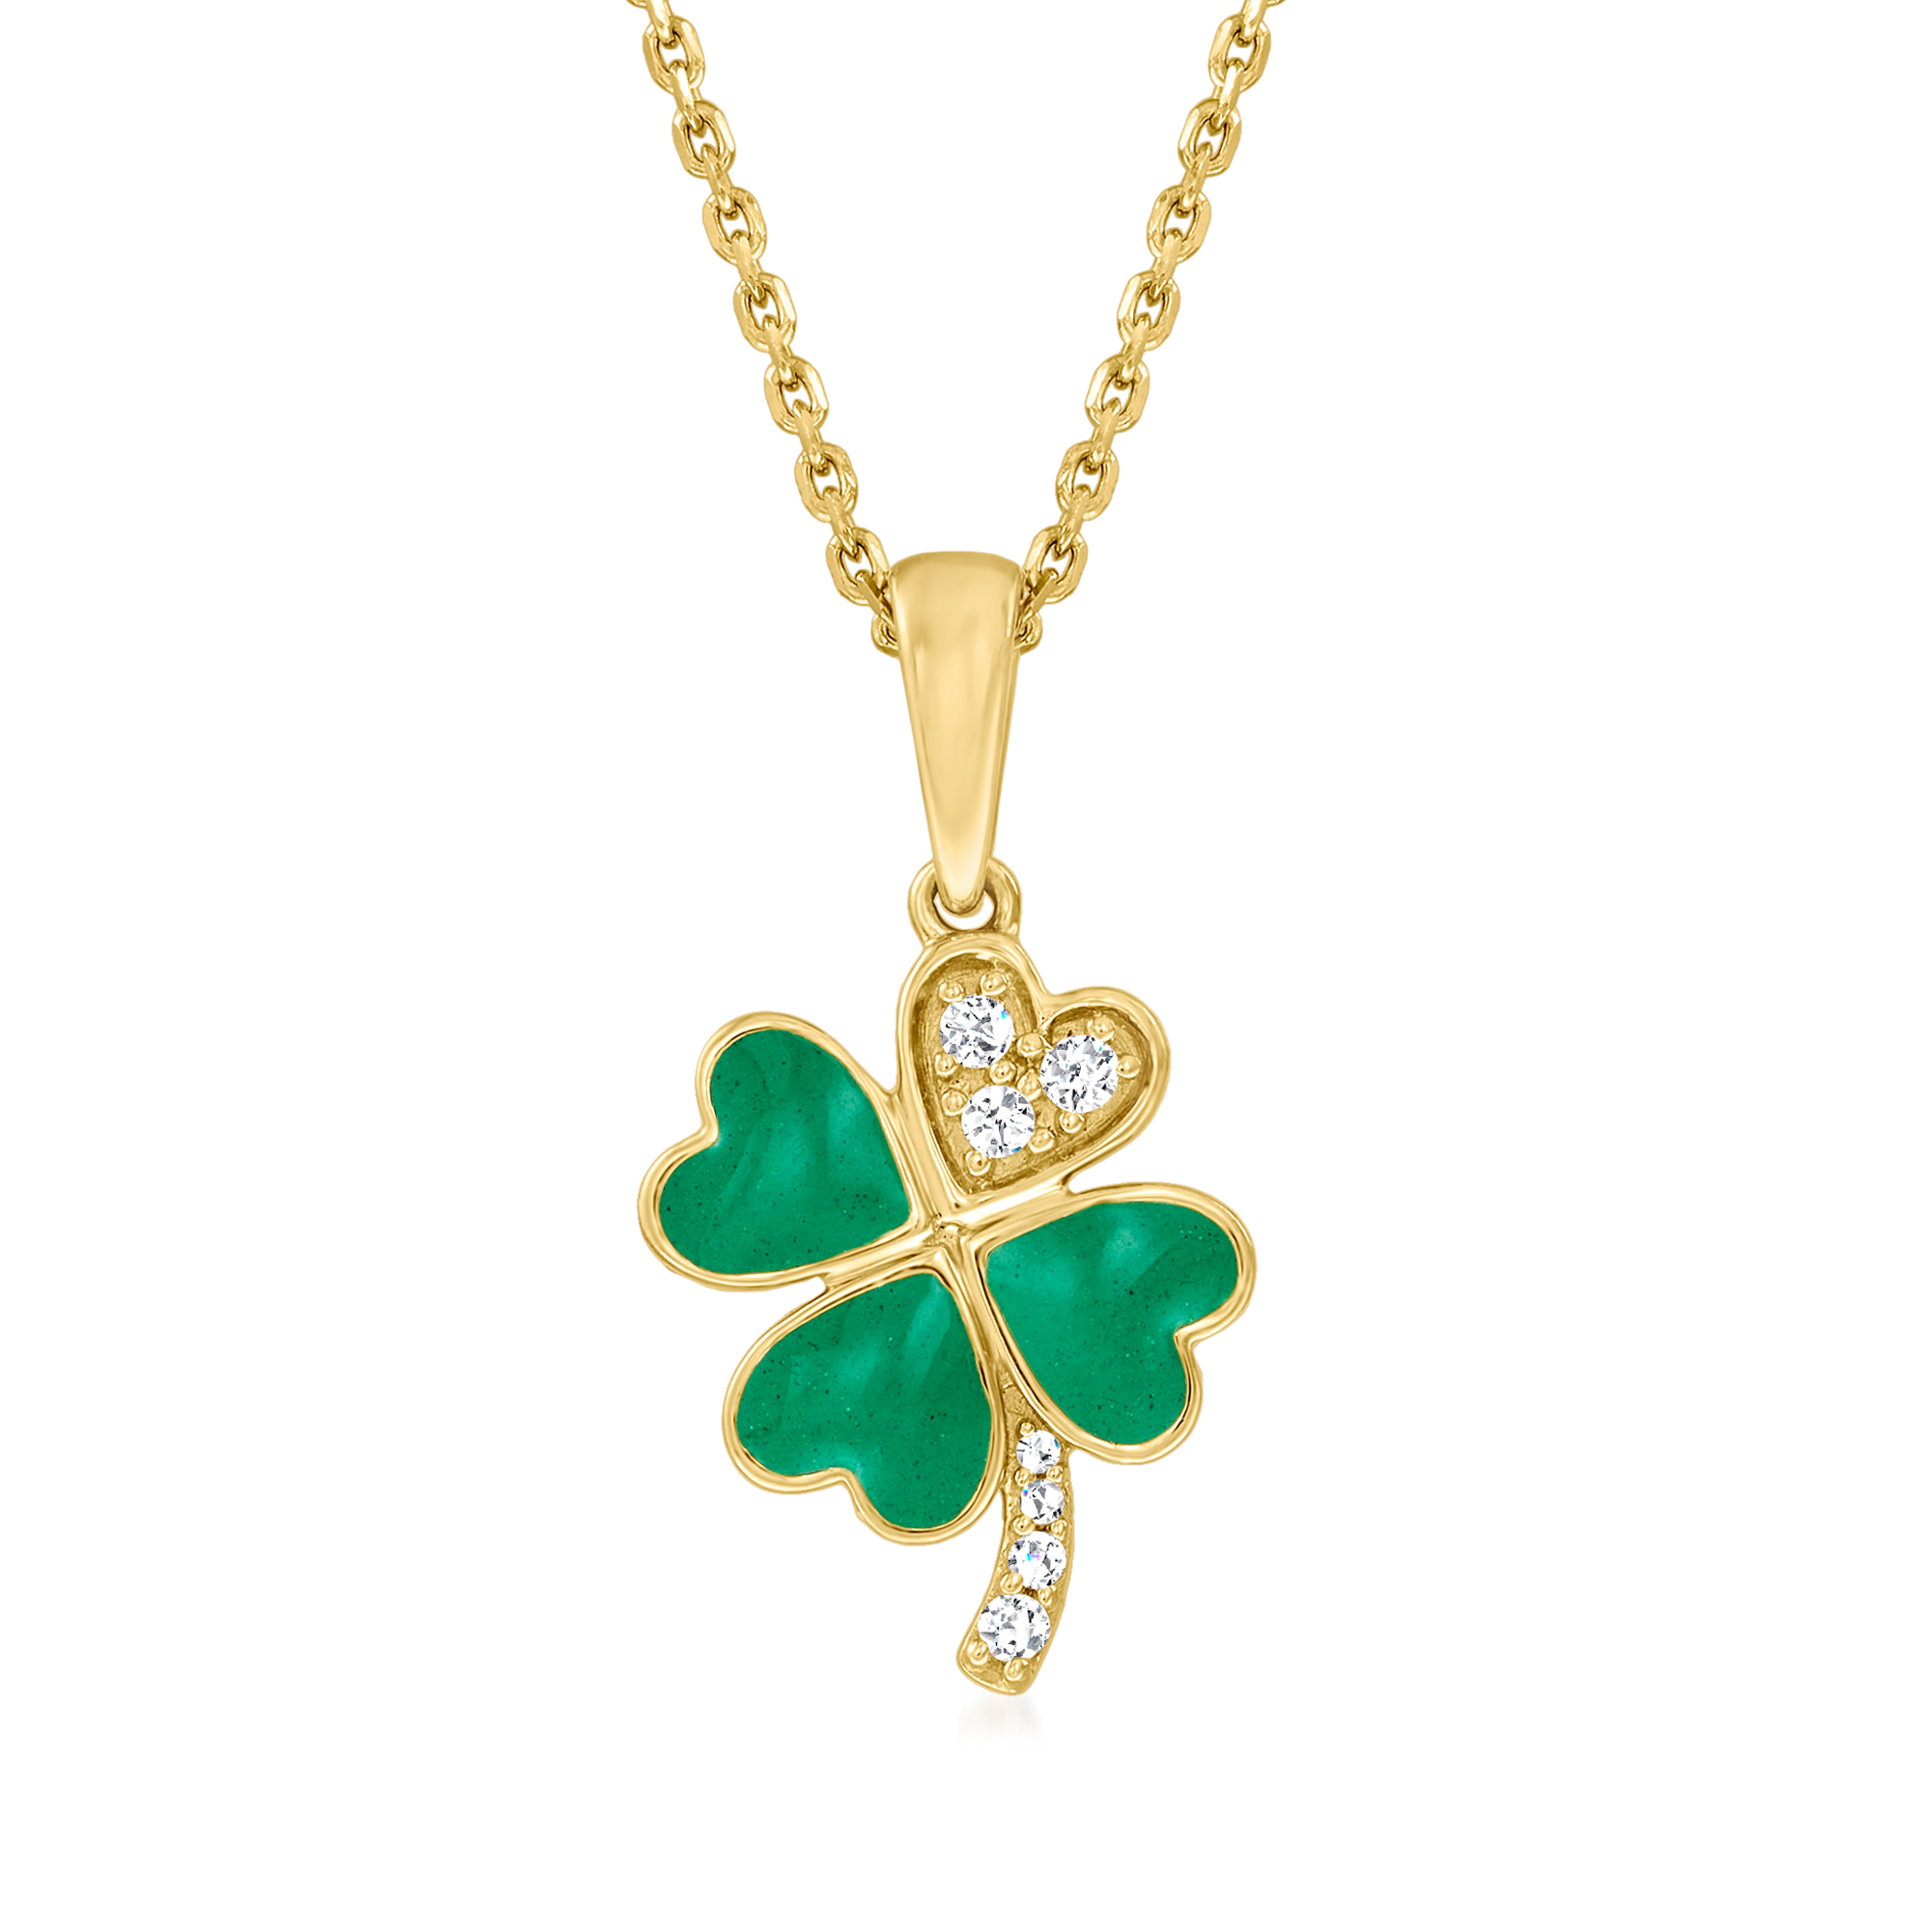 Green Enamel Four-Leaf Clover Pendant Necklace with Diamond Accents in ...